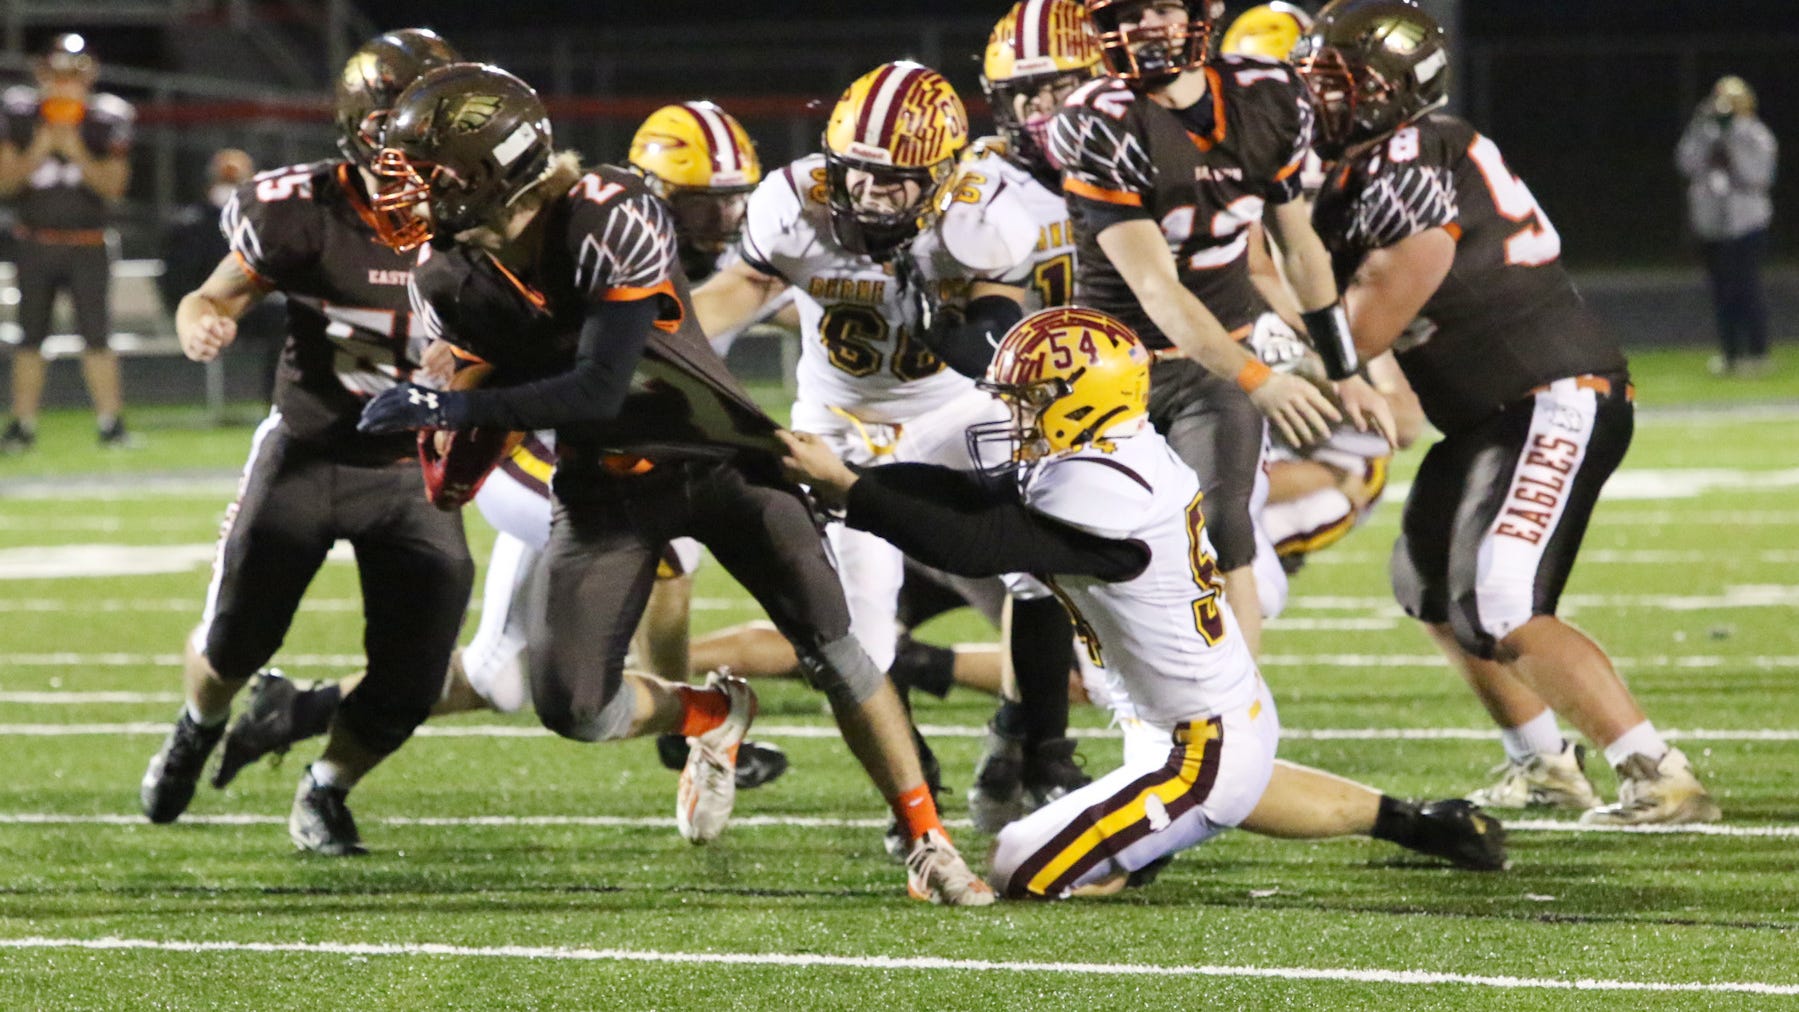 Berne Union five turnovers, hangs on for 2822 win over Eastern